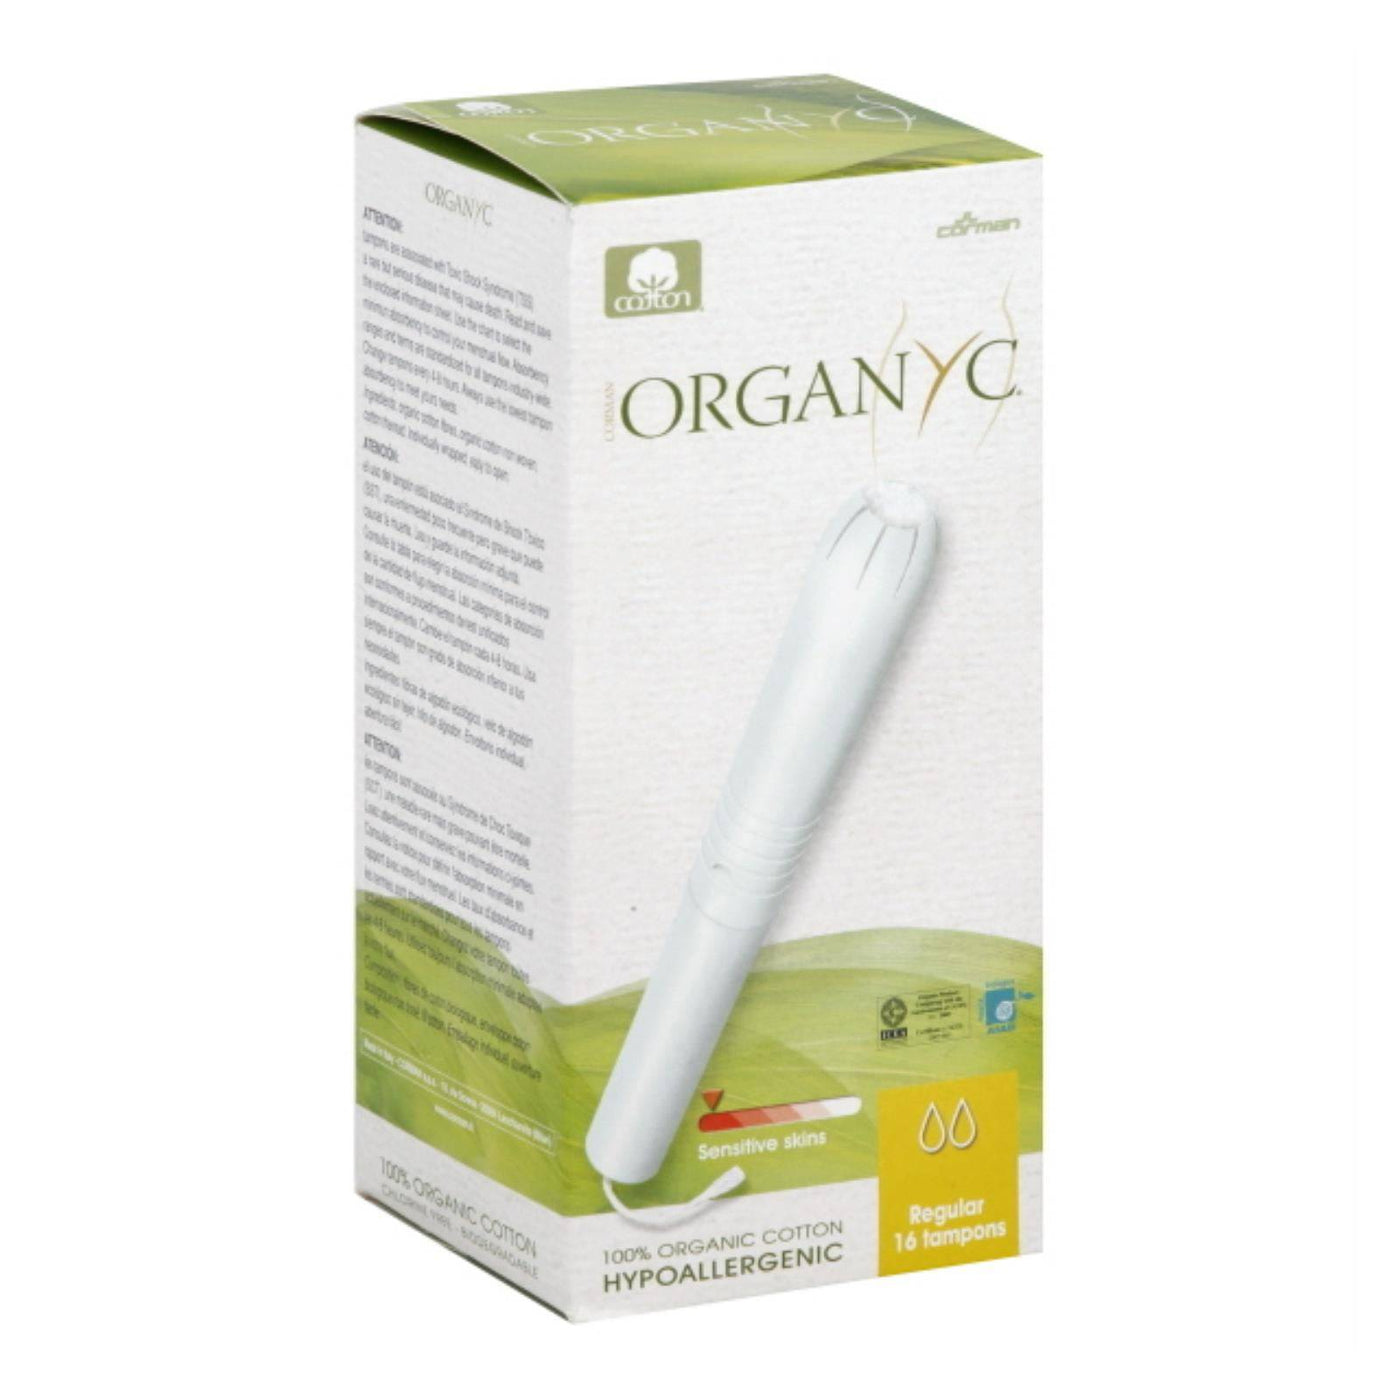 Buy Organyc Cotton Tampons - Regular Apple - 16 Pack  at OnlyNaturals.us